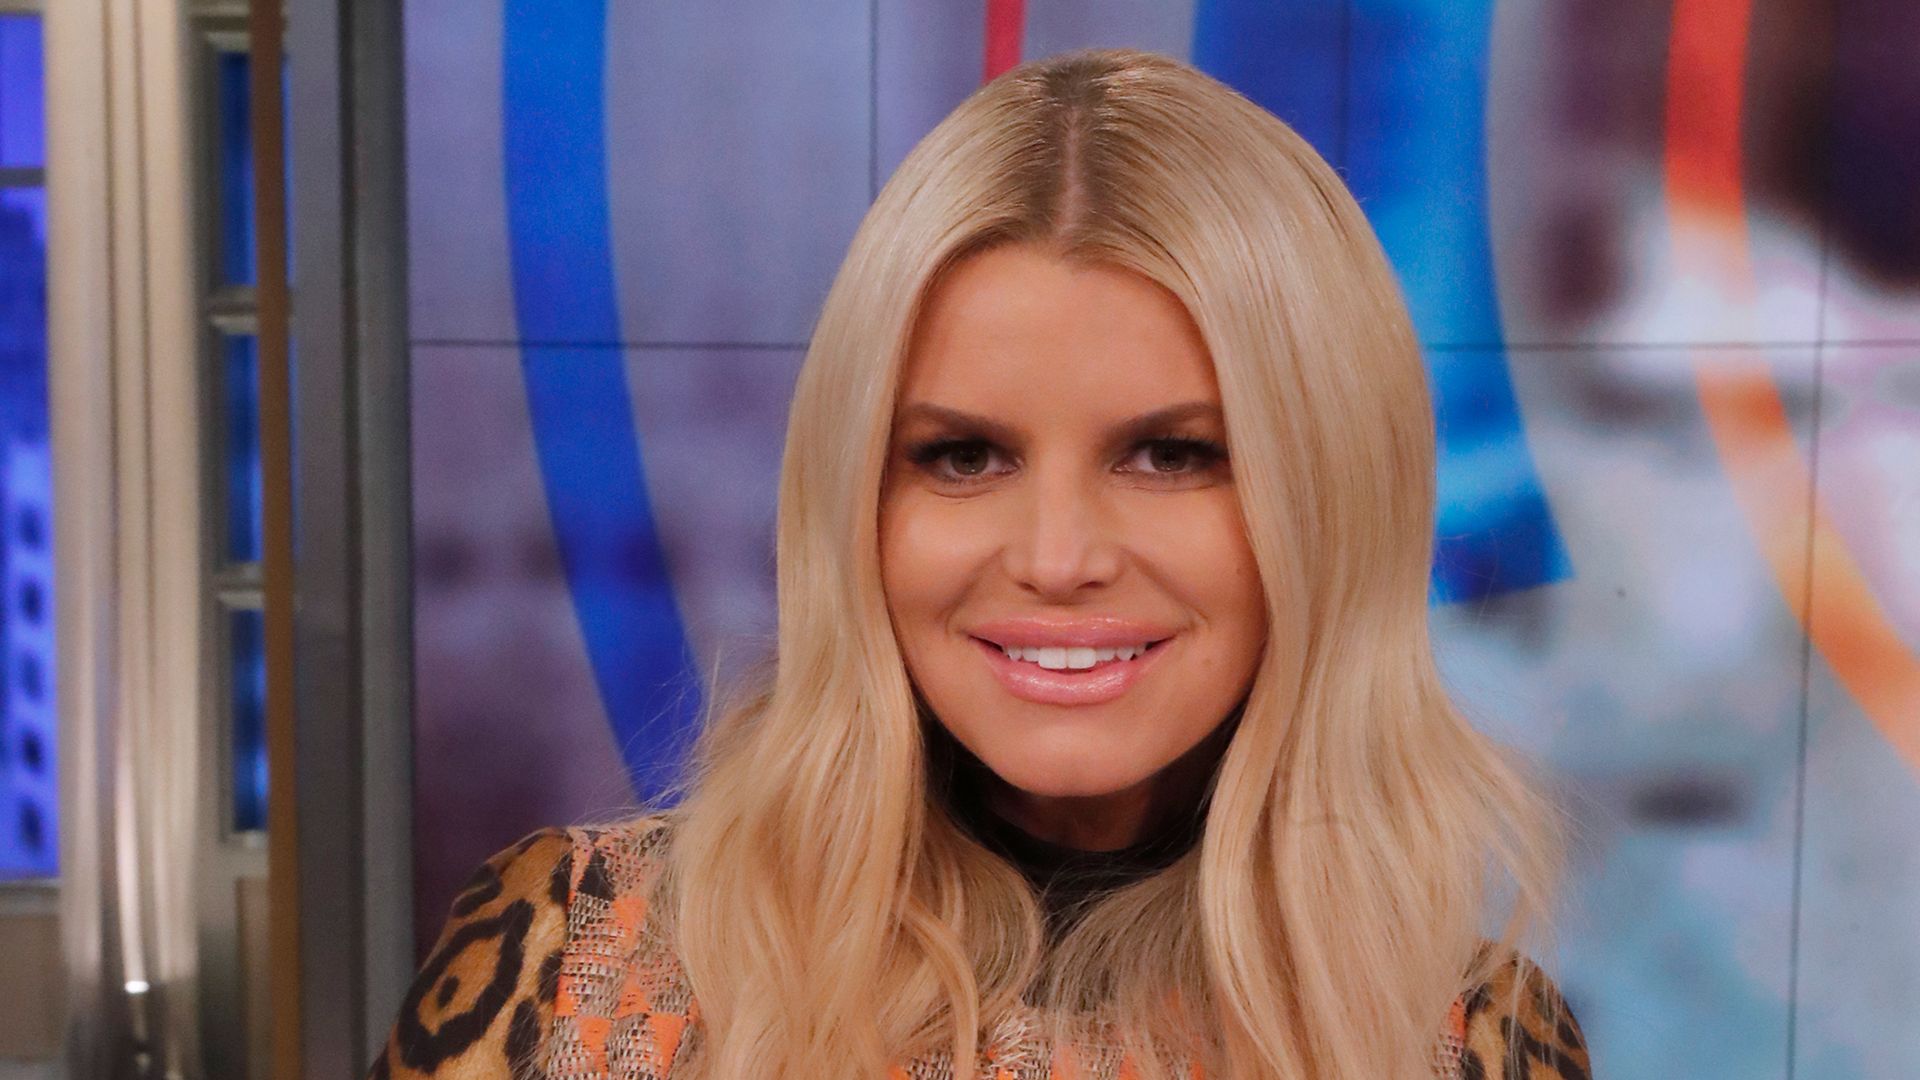 Jessica Simpson is the guest on Wednesday, February 5, 2020 on ABC's The View.